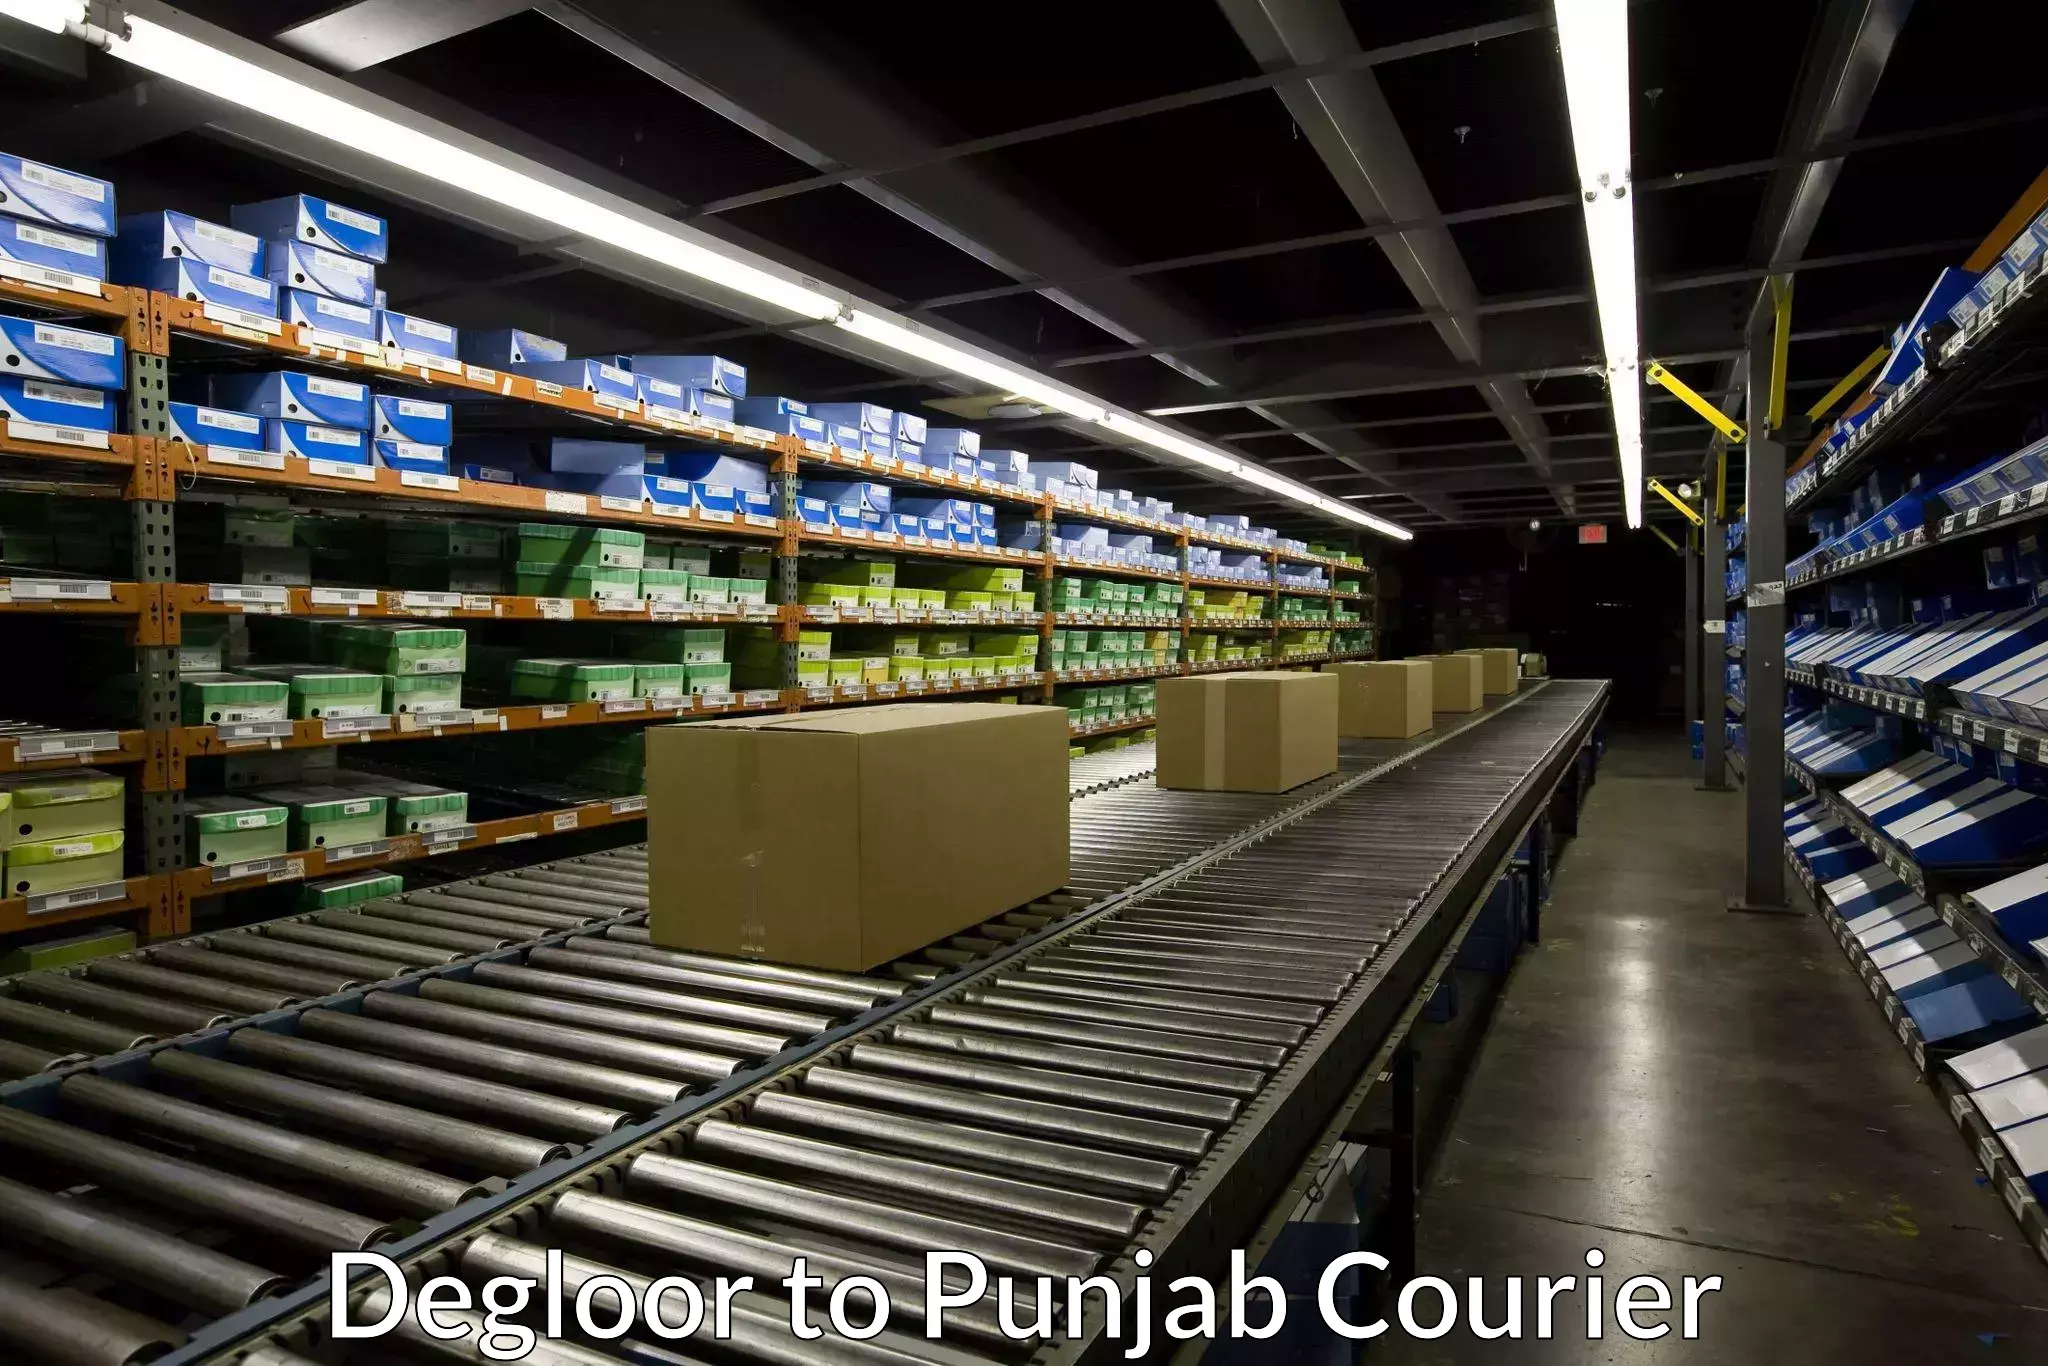 Efficient parcel tracking Degloor to Beas